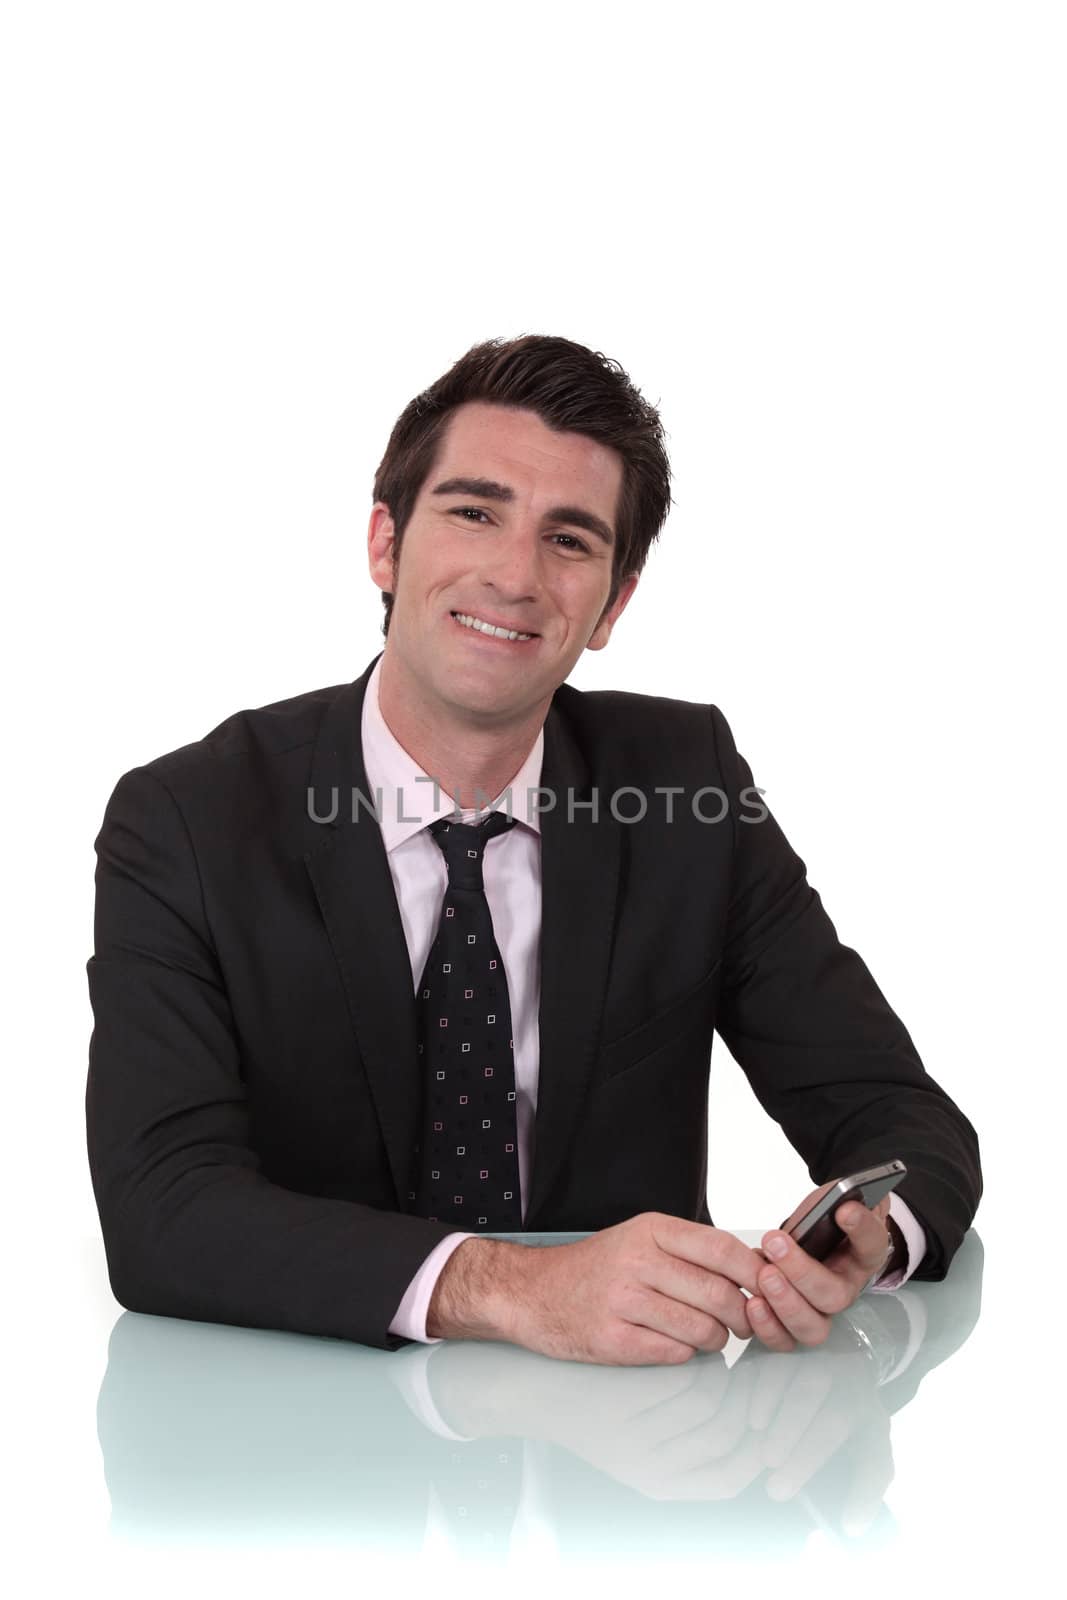 Smiling businessman looking at his mobile phone